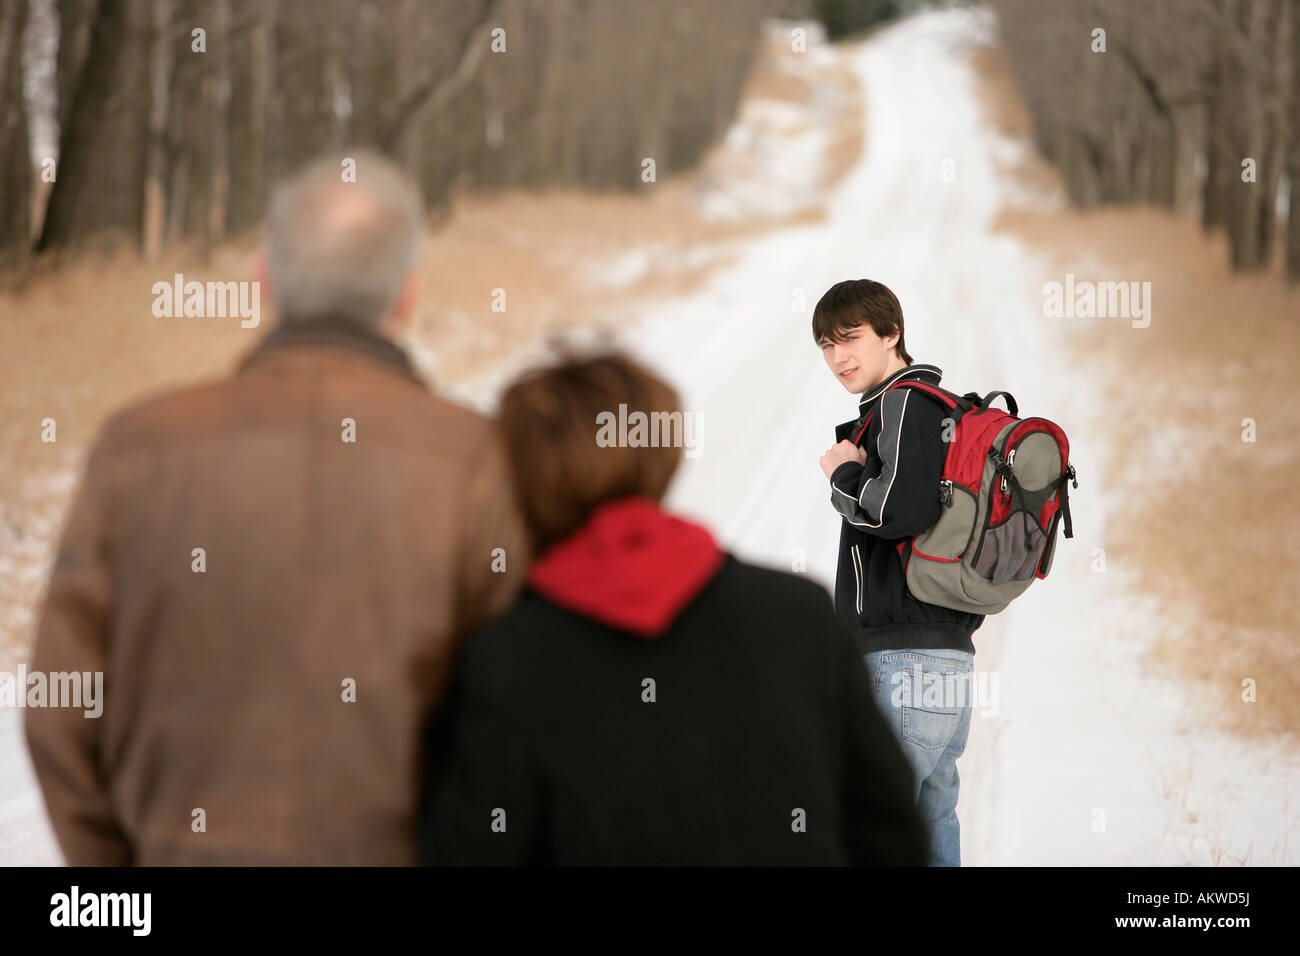 A teenage boy walking on a snow-covered path Stock Photo